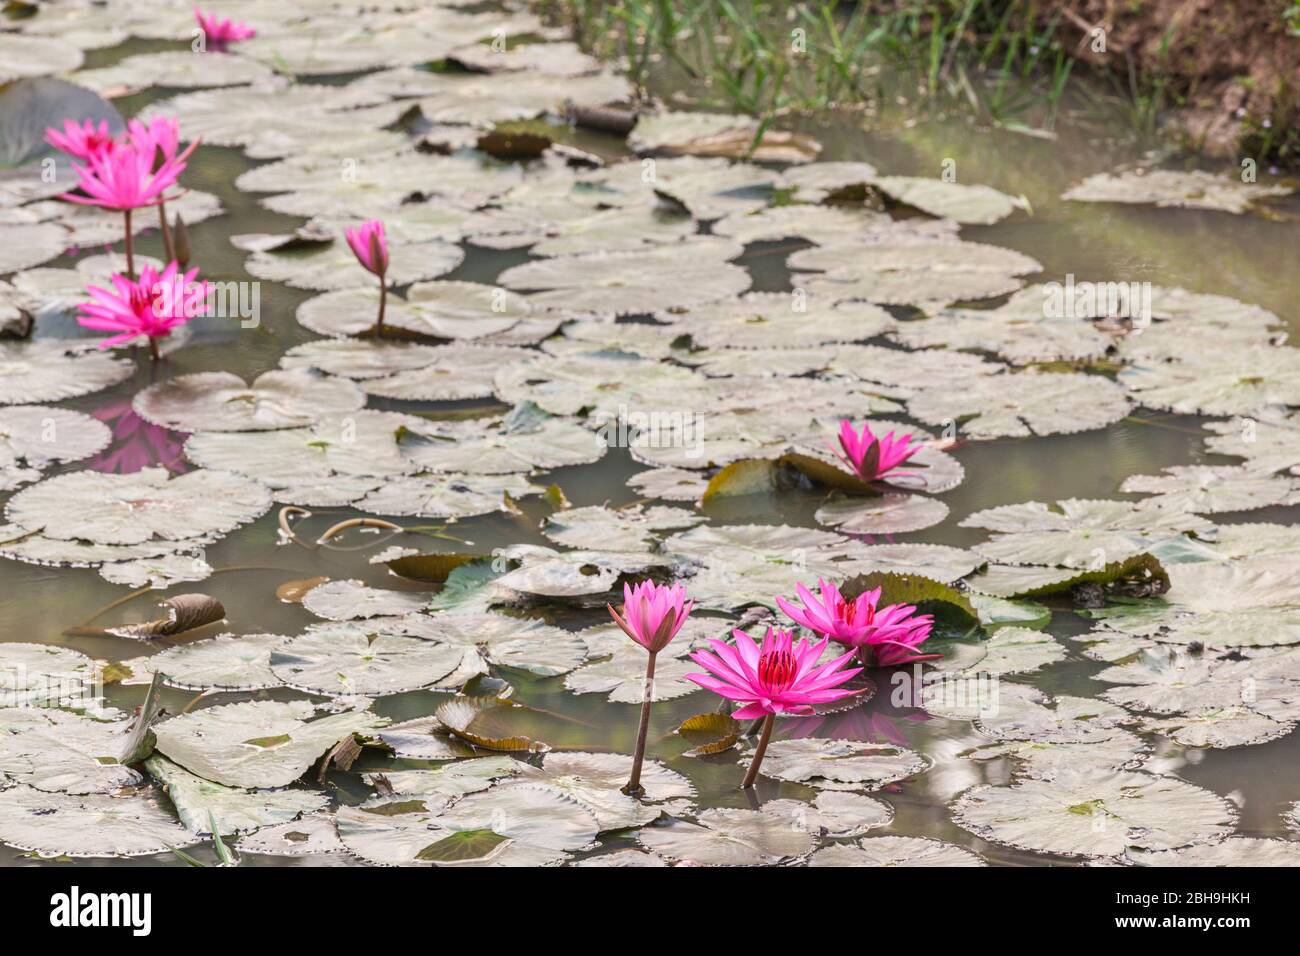 Cambodia, Angkor, Banteay Srei Temple, flowers in the temple moat Stock Photo